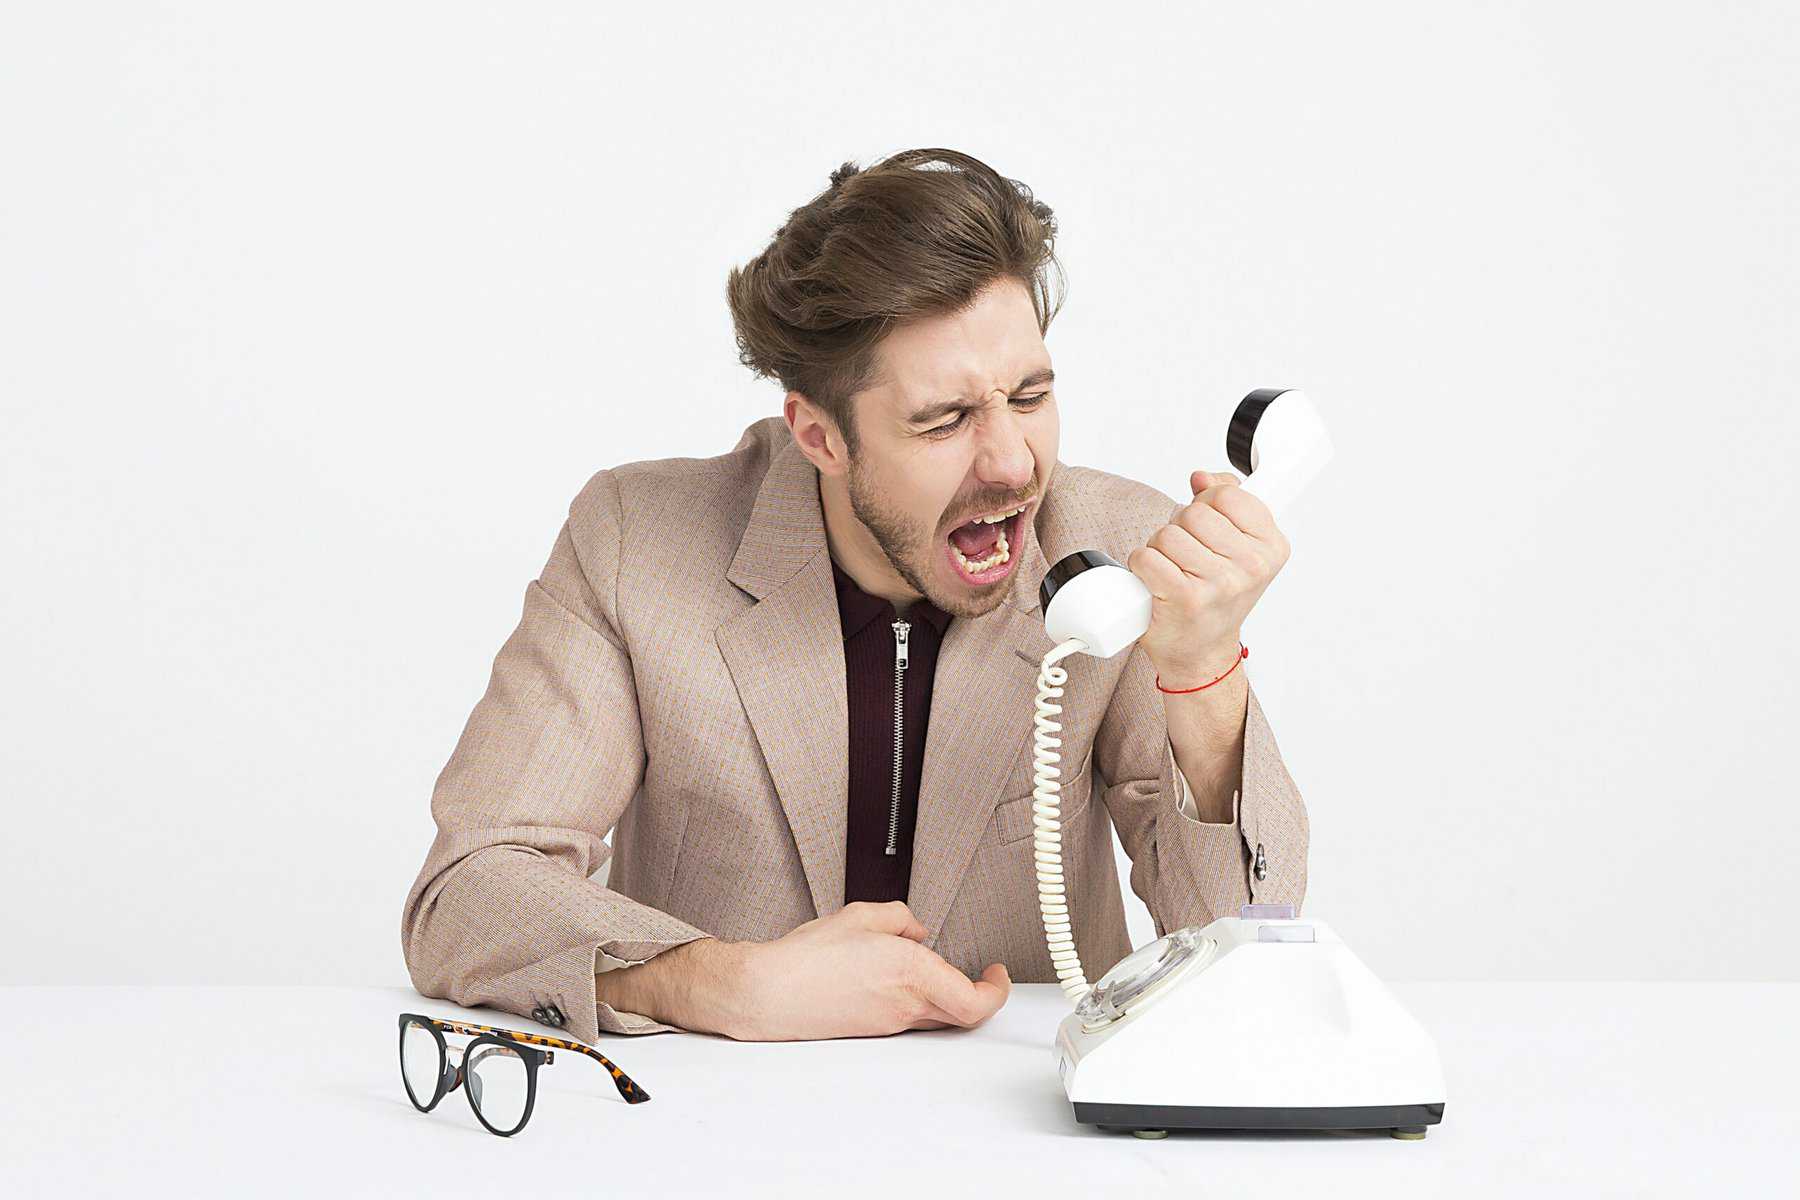 salesman yelling into a white corded phone